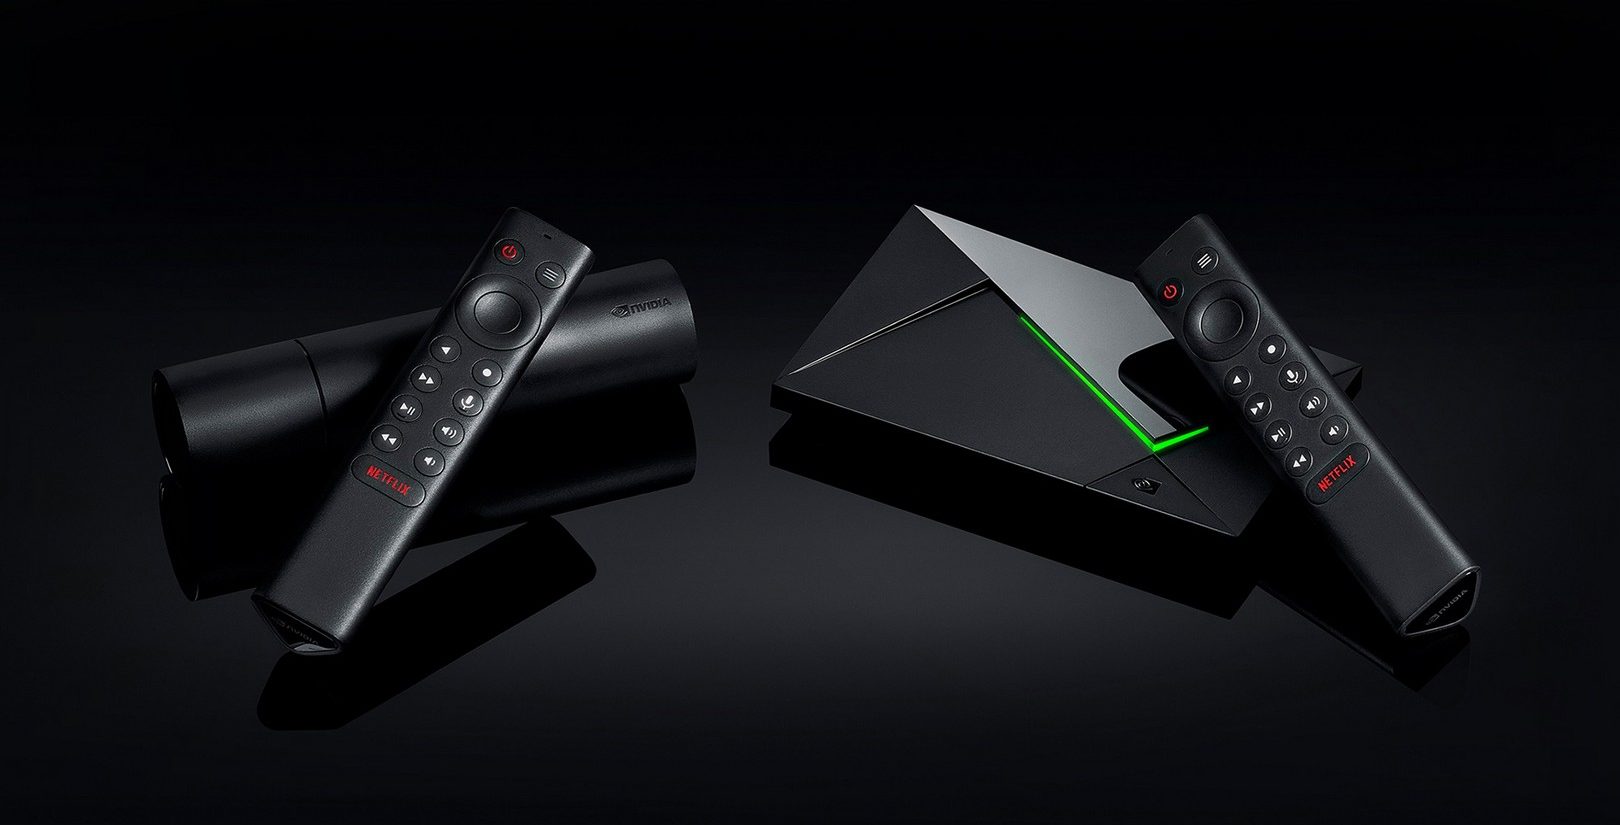 Latest Android TV Update Brings Discover Tab, More Content Suggestions to Nvidia Shield TV